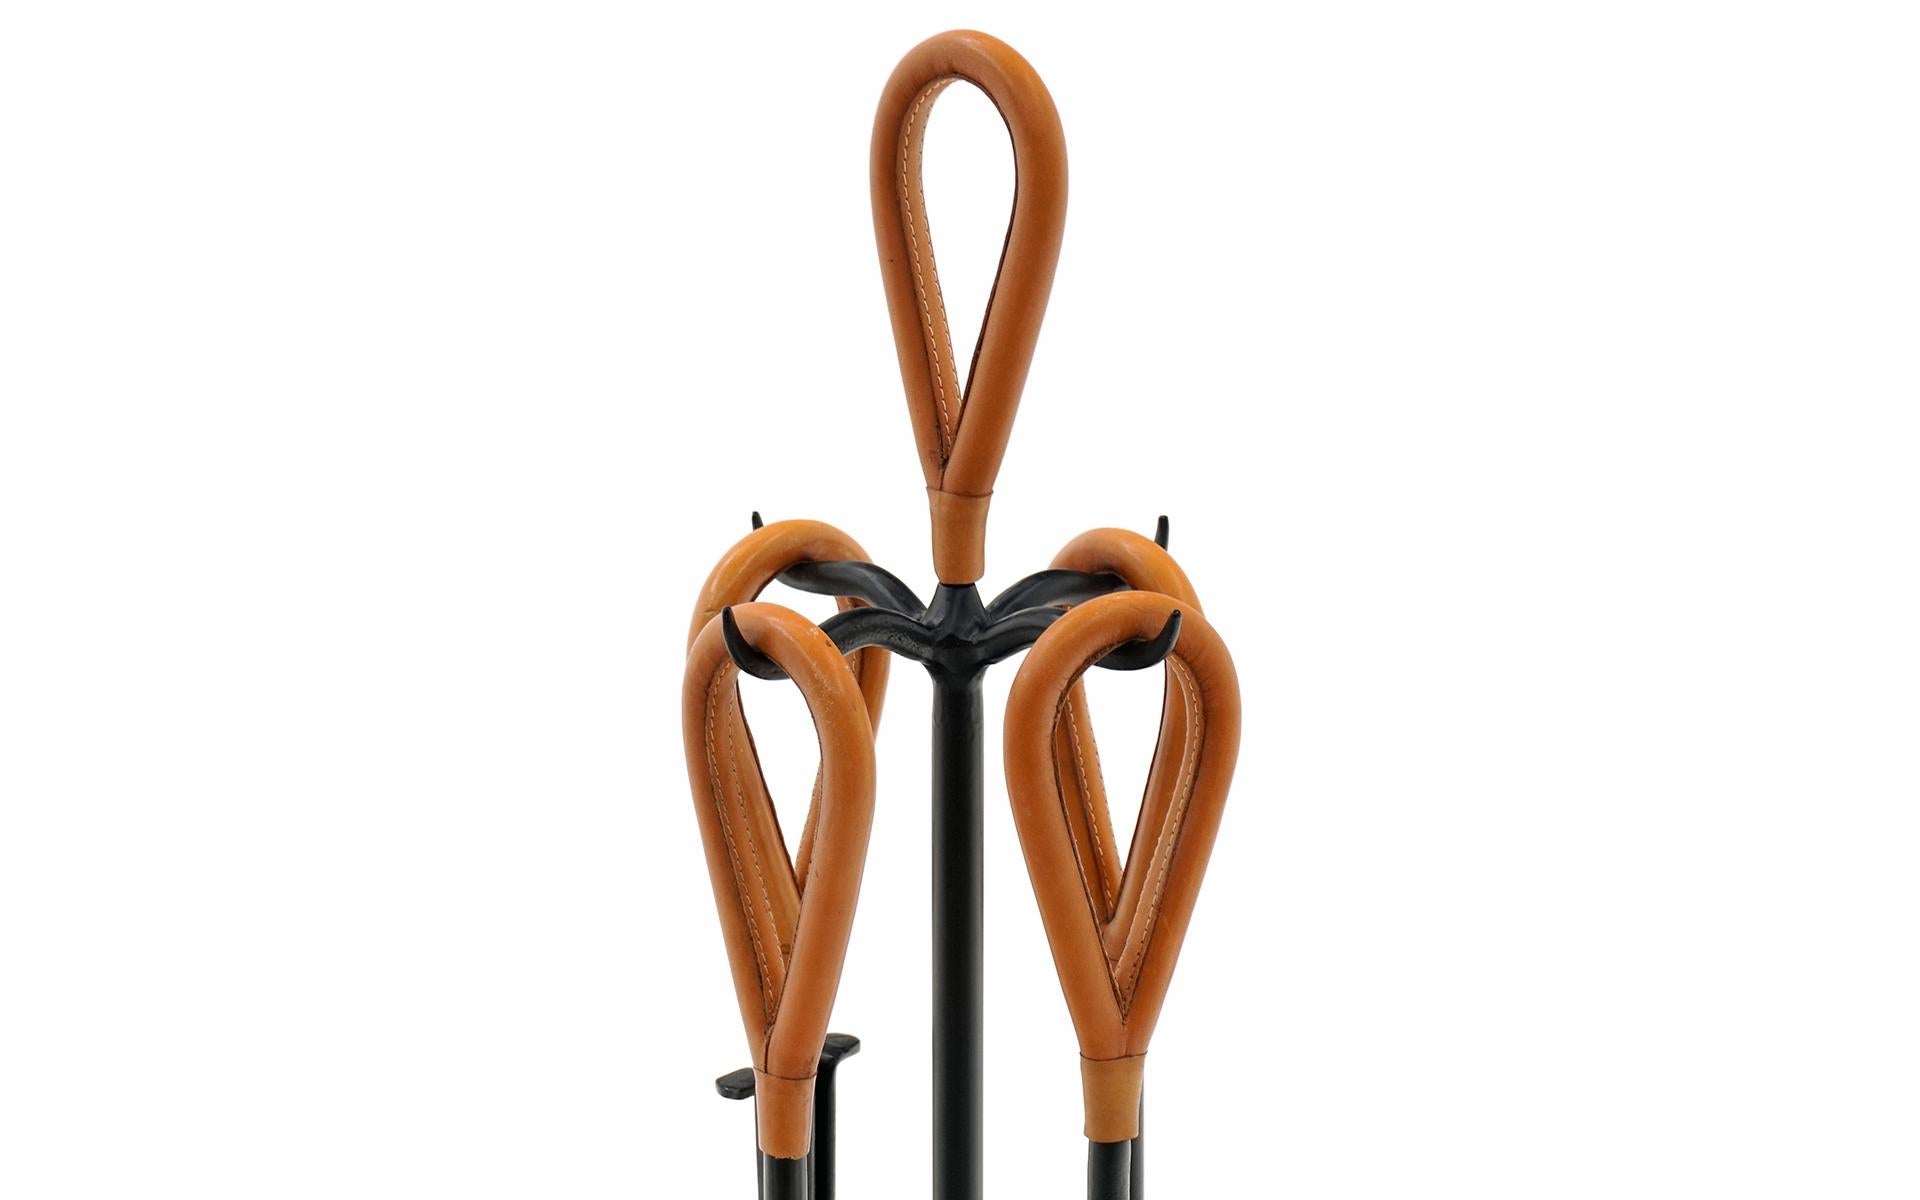 Fireplace tool set in solid iron and cognac leather wrapped handles in the style of Jacques Adnet. Very high quality construction and apparently used very little. The handles show no signs of wear and the iron portions show very little. These look